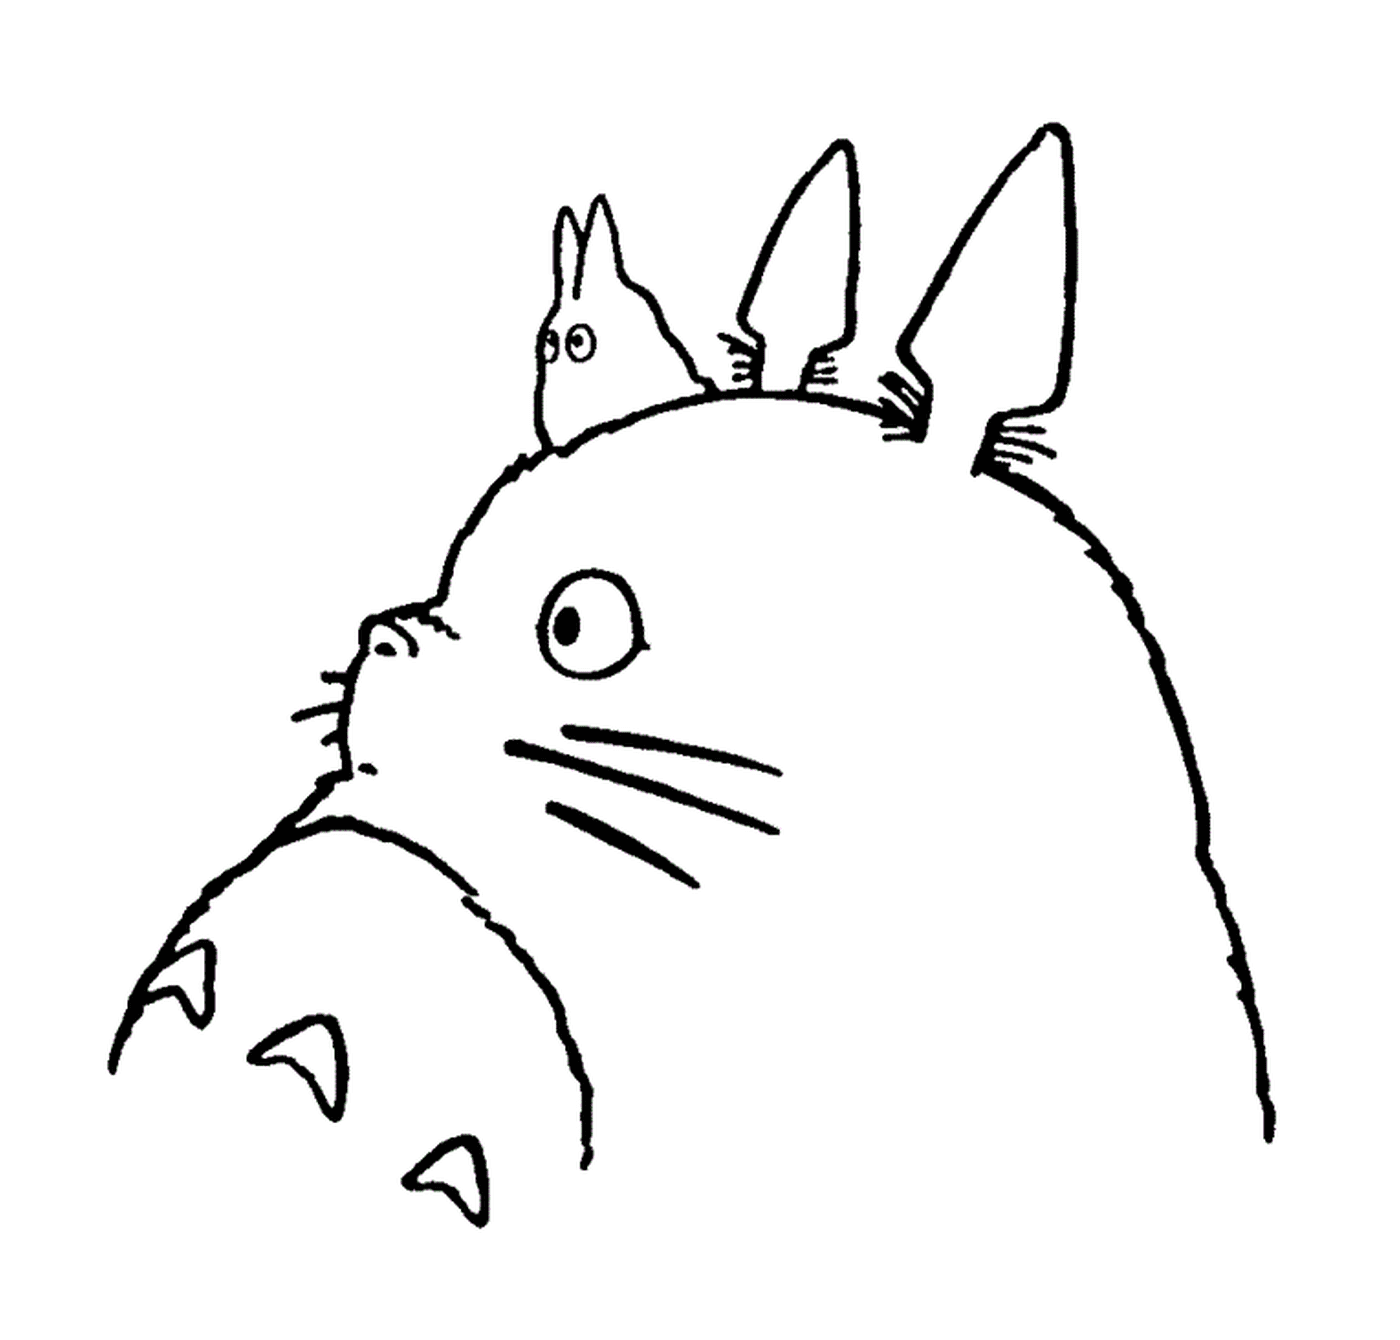  Totoro in black and white 